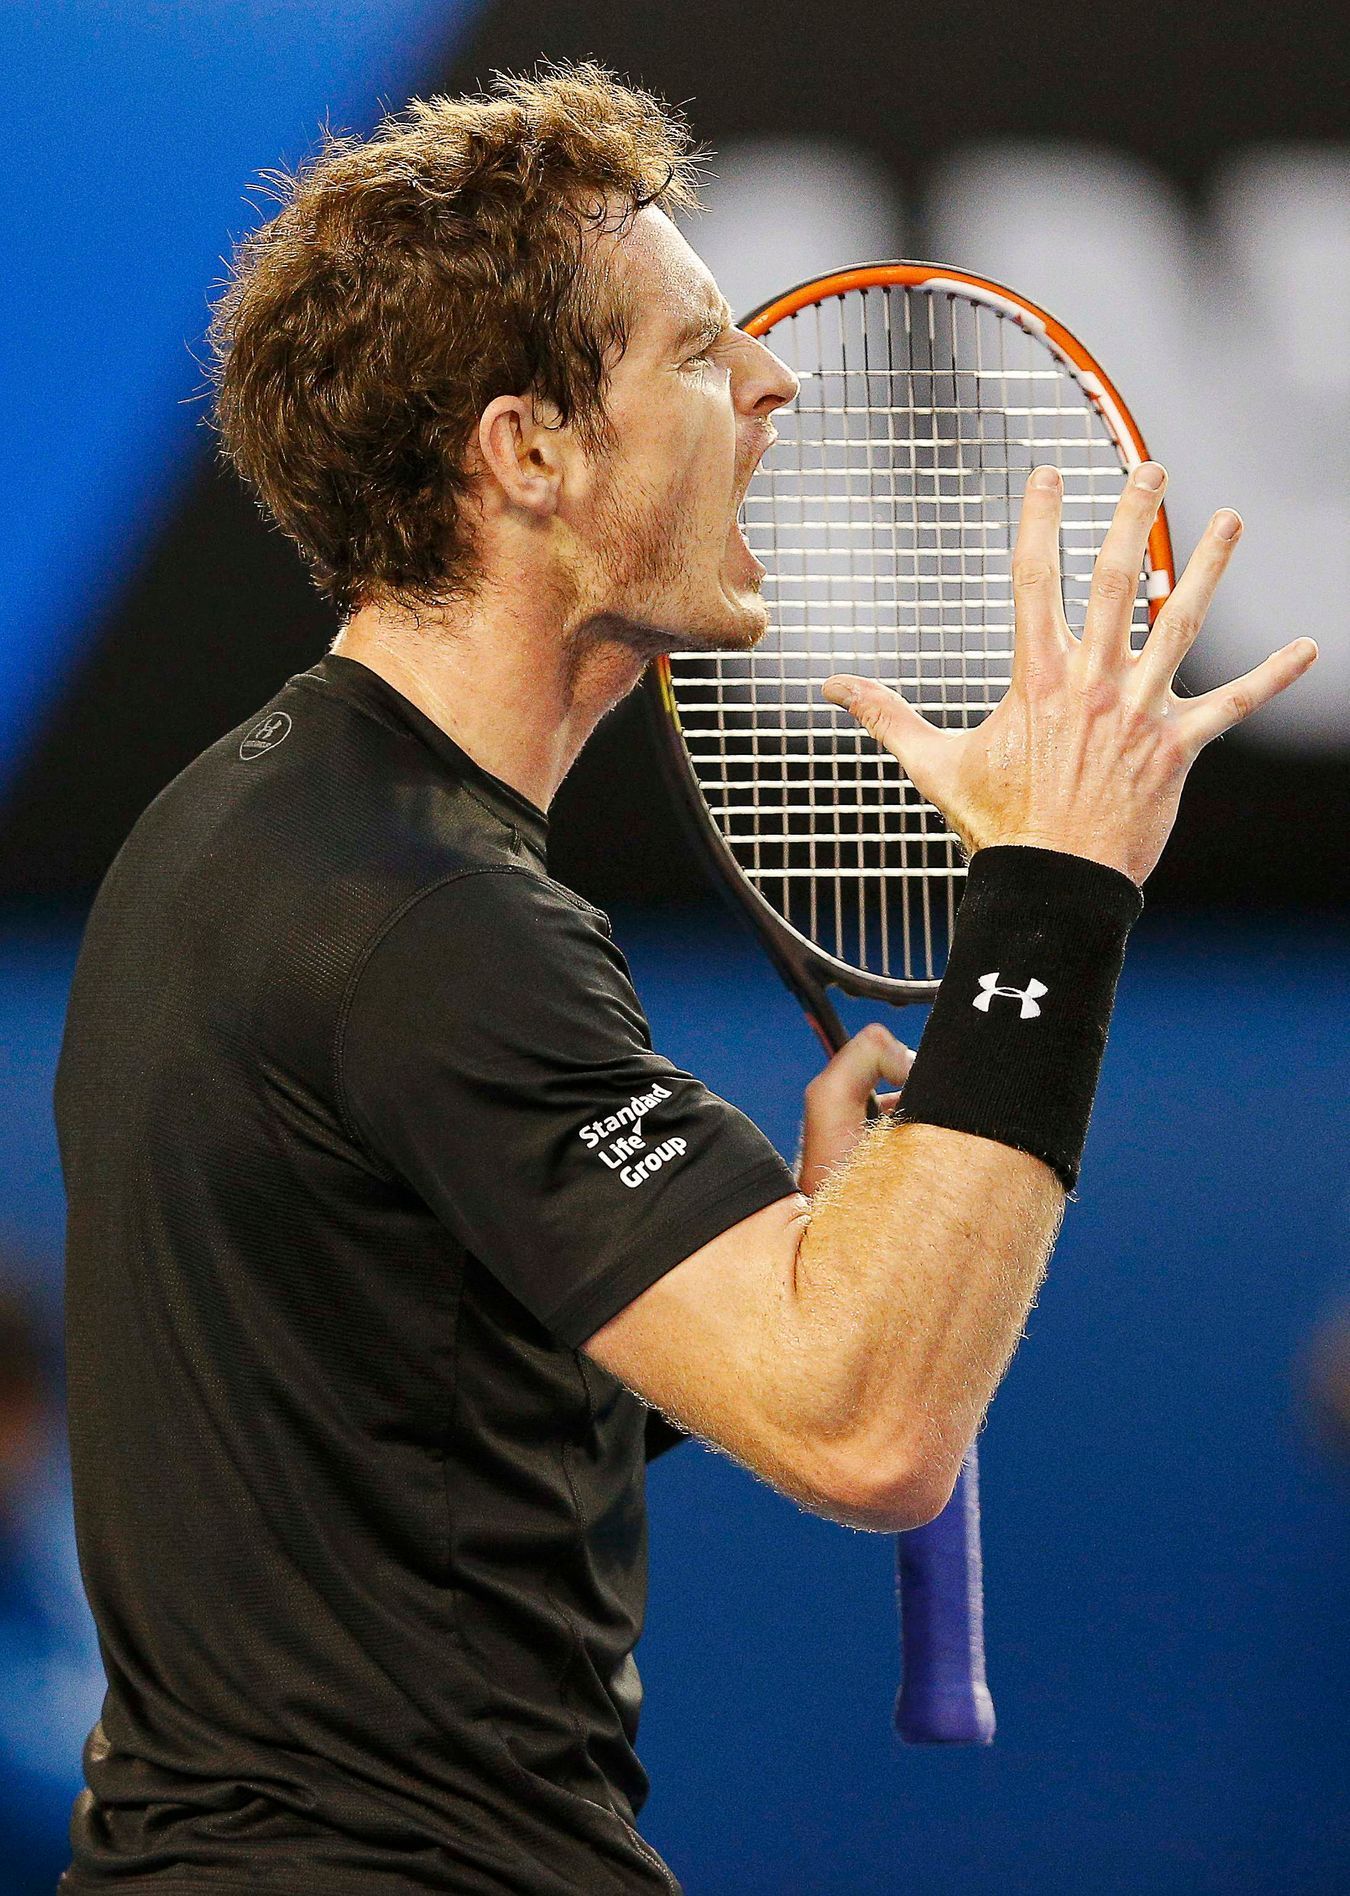 Murray of Britain reacts after hitting a shot to Djokovic of Serbia during their men's singles final match at the Australian Open 2015 tennis tournament in Melbourne